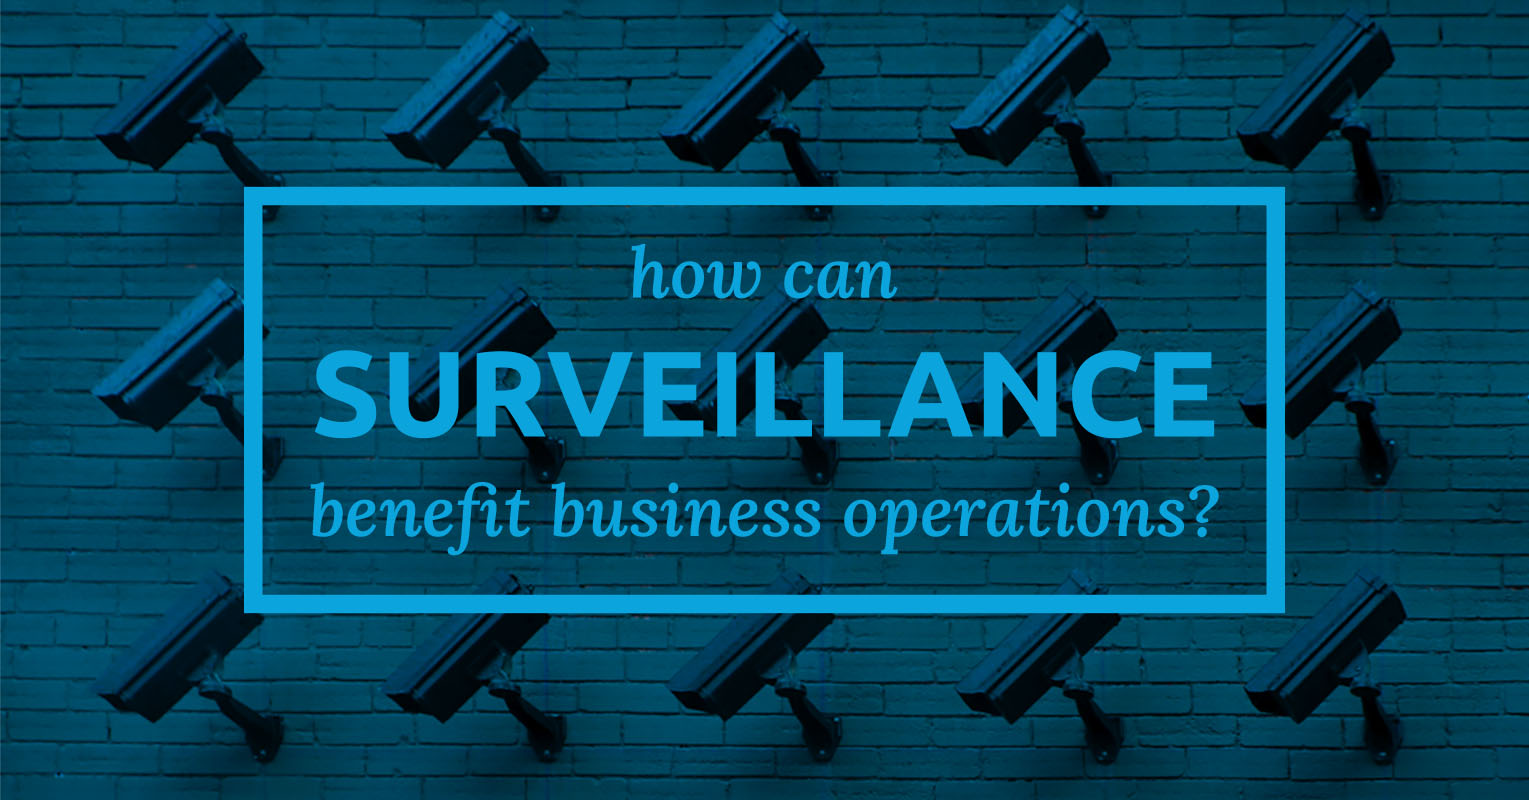 How can surveillance systems improve business operations?